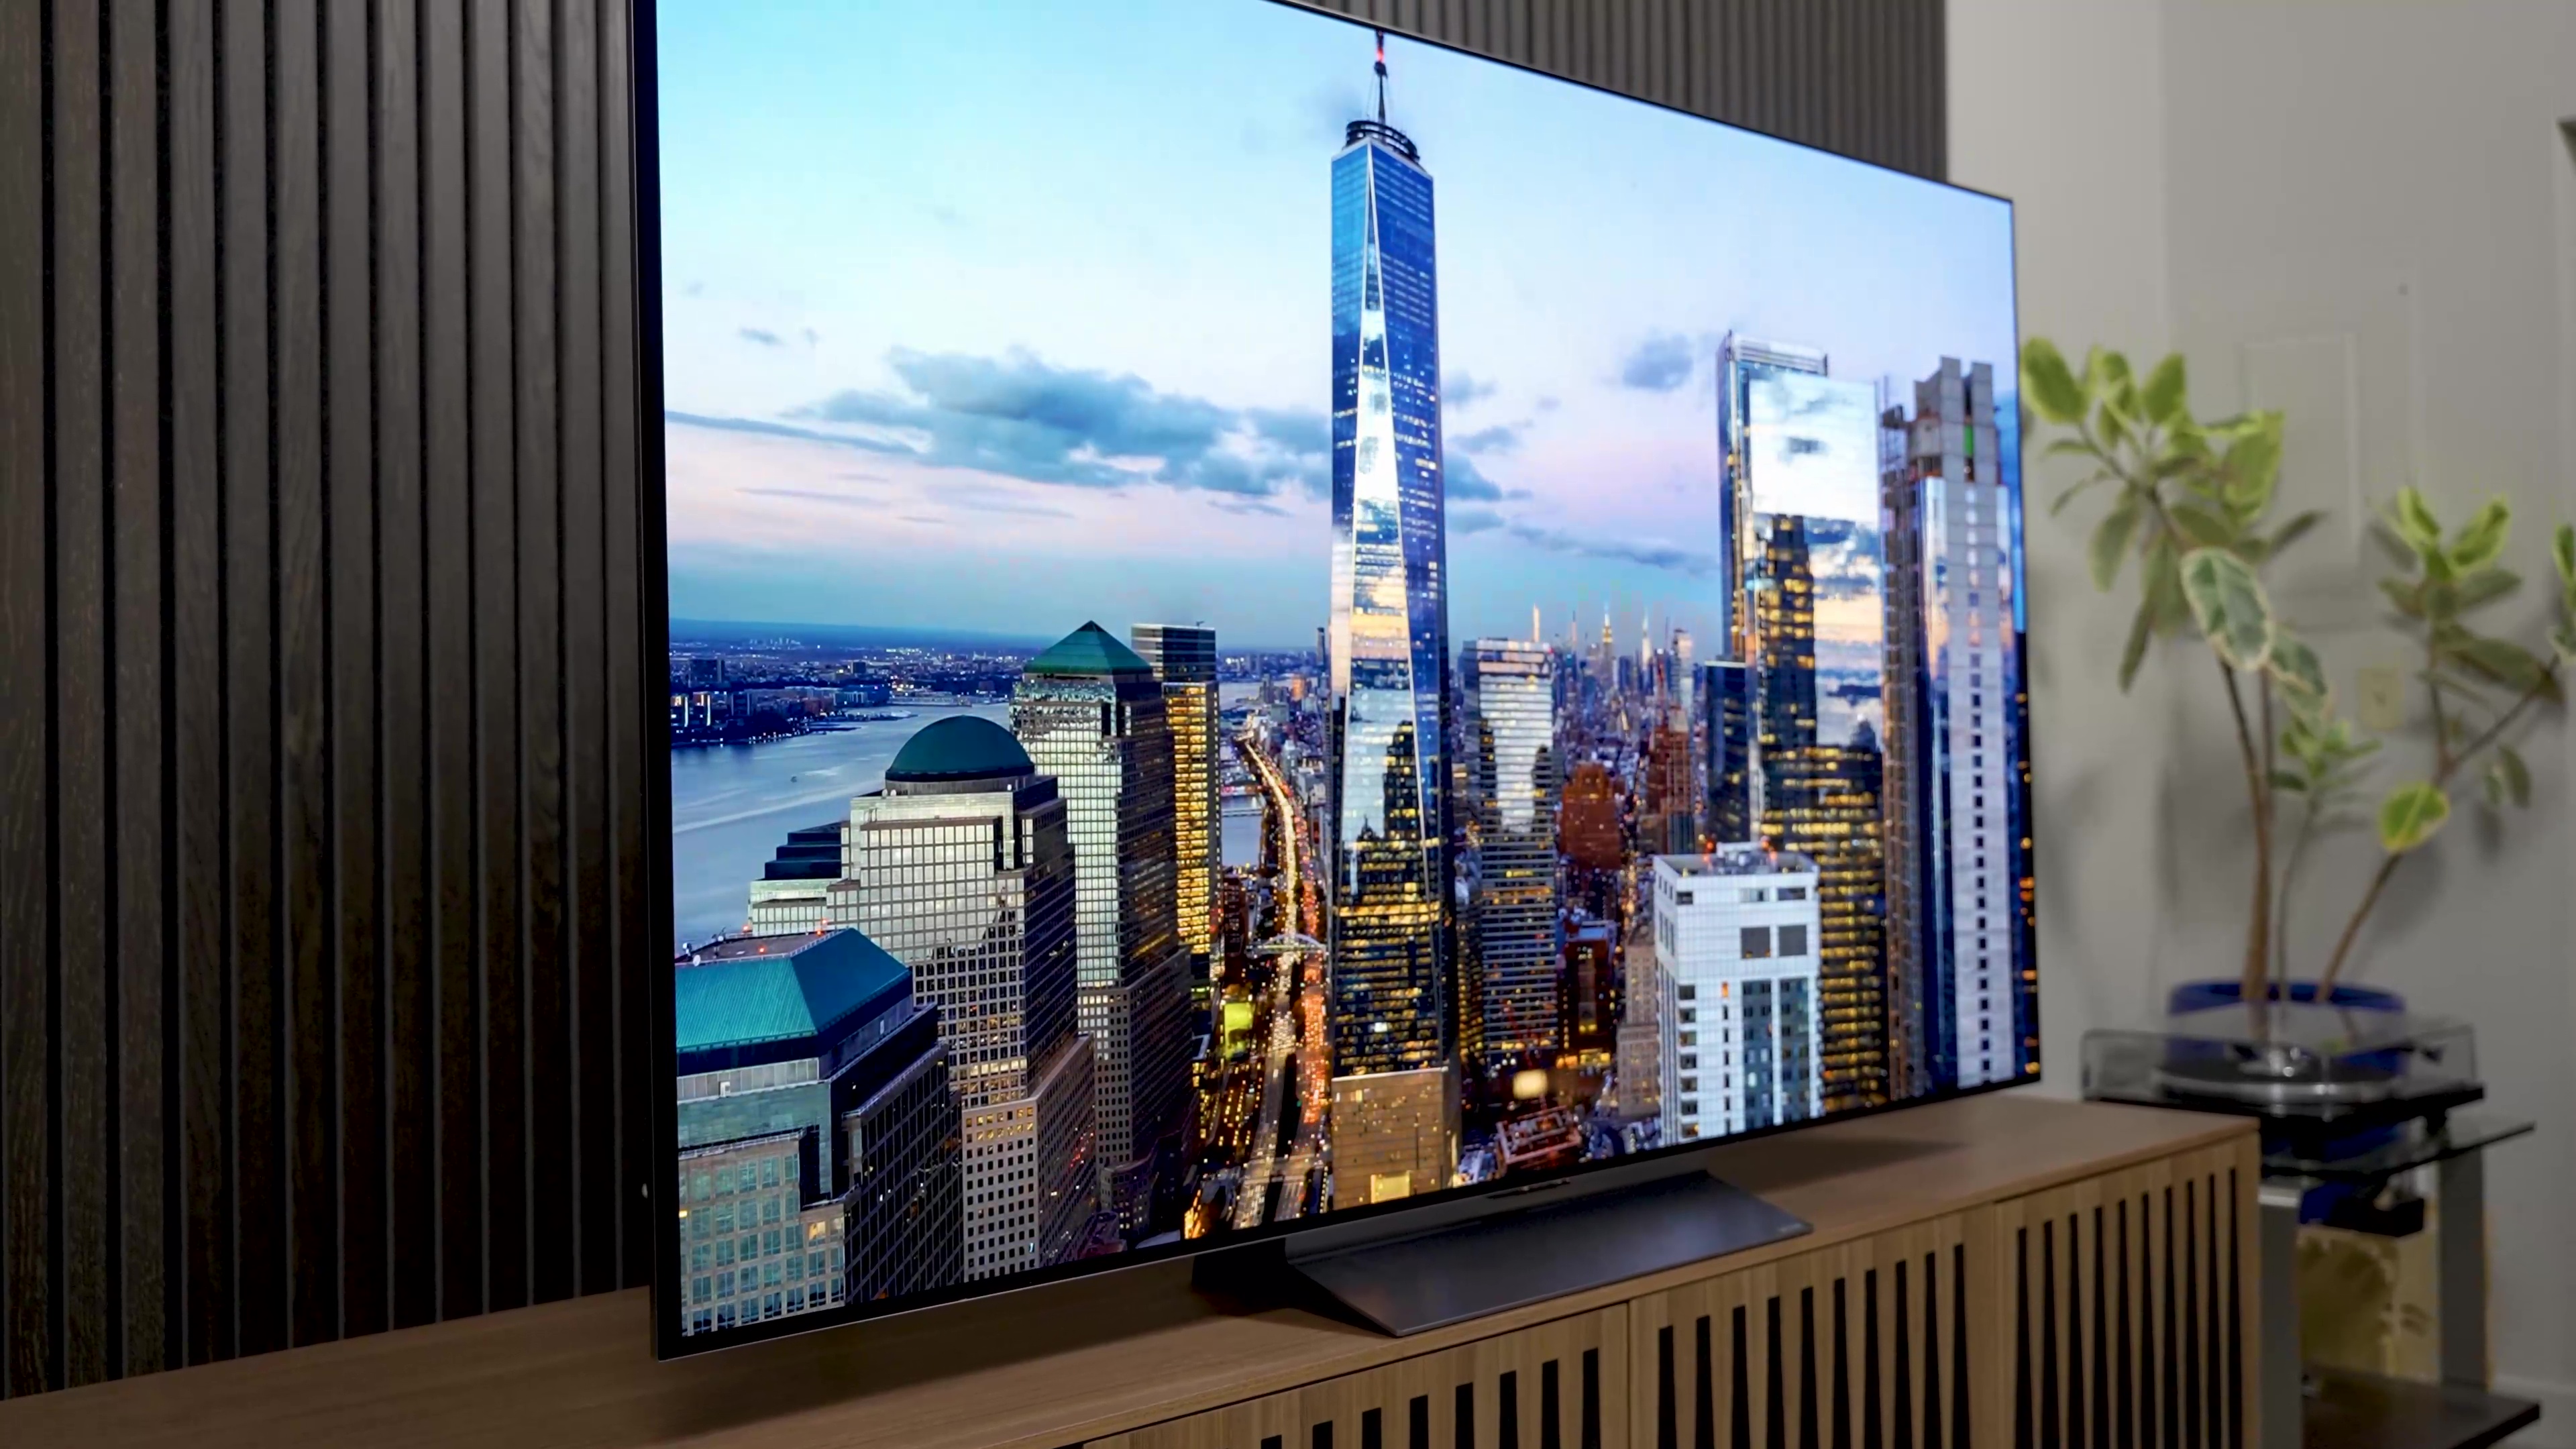 LG's 65-inch C3 OLED TV is on sale for under $1600